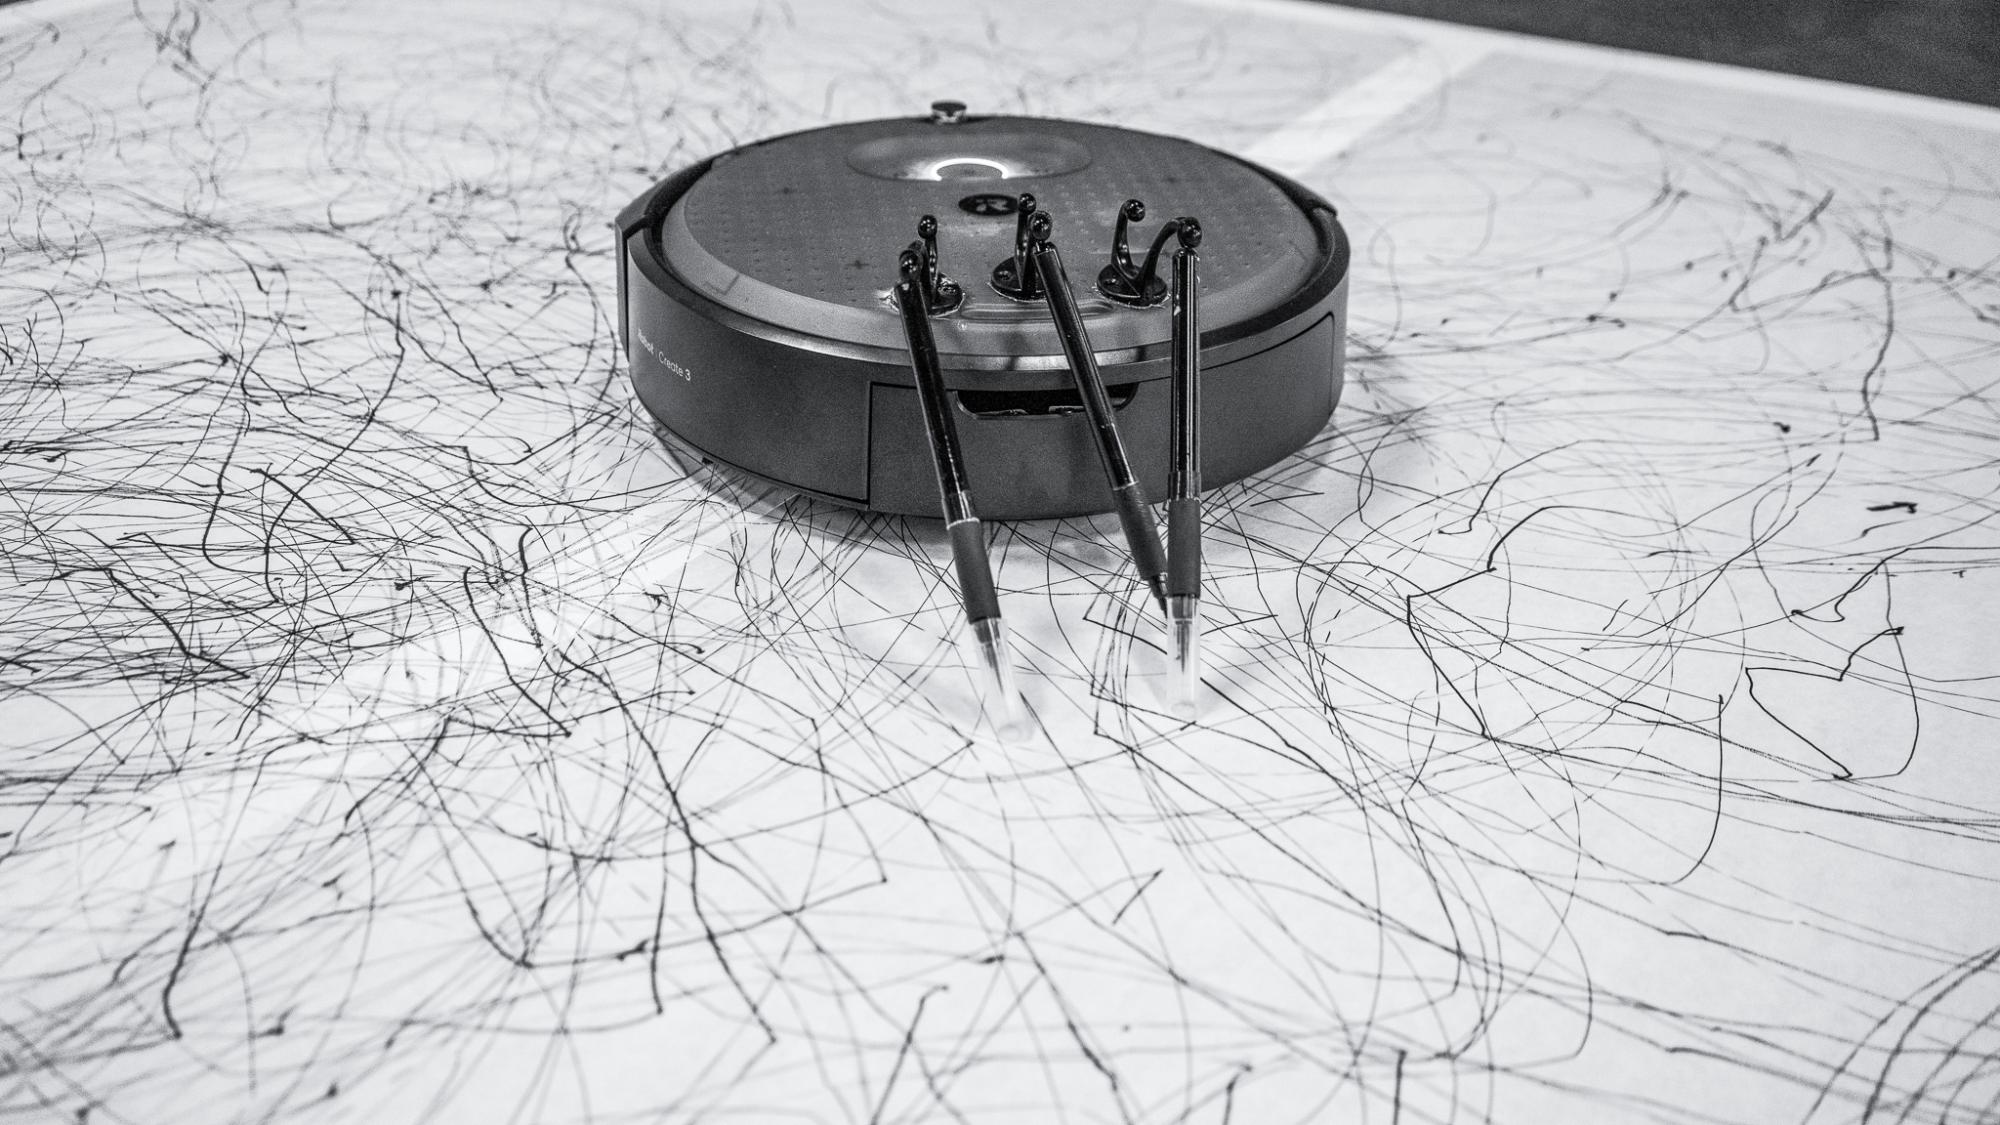 Roomba vacuum with pens drawing on large sheet of paper on the floor